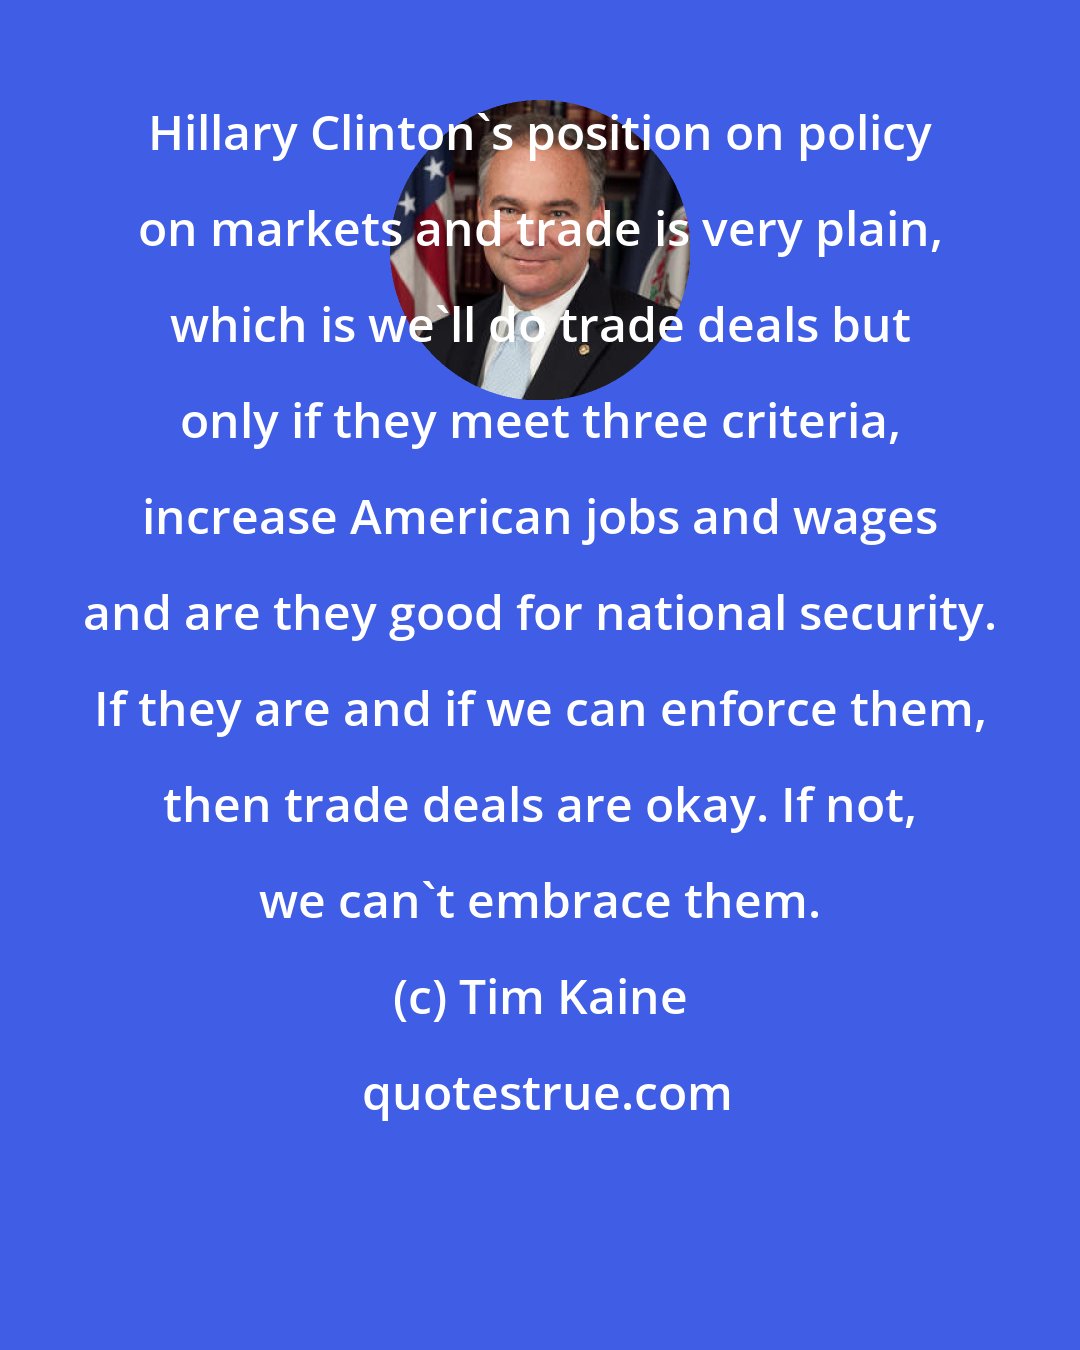 Tim Kaine: Hillary Clinton's position on policy on markets and trade is very plain, which is we'll do trade deals but only if they meet three criteria, increase American jobs and wages and are they good for national security. If they are and if we can enforce them, then trade deals are okay. If not, we can't embrace them.